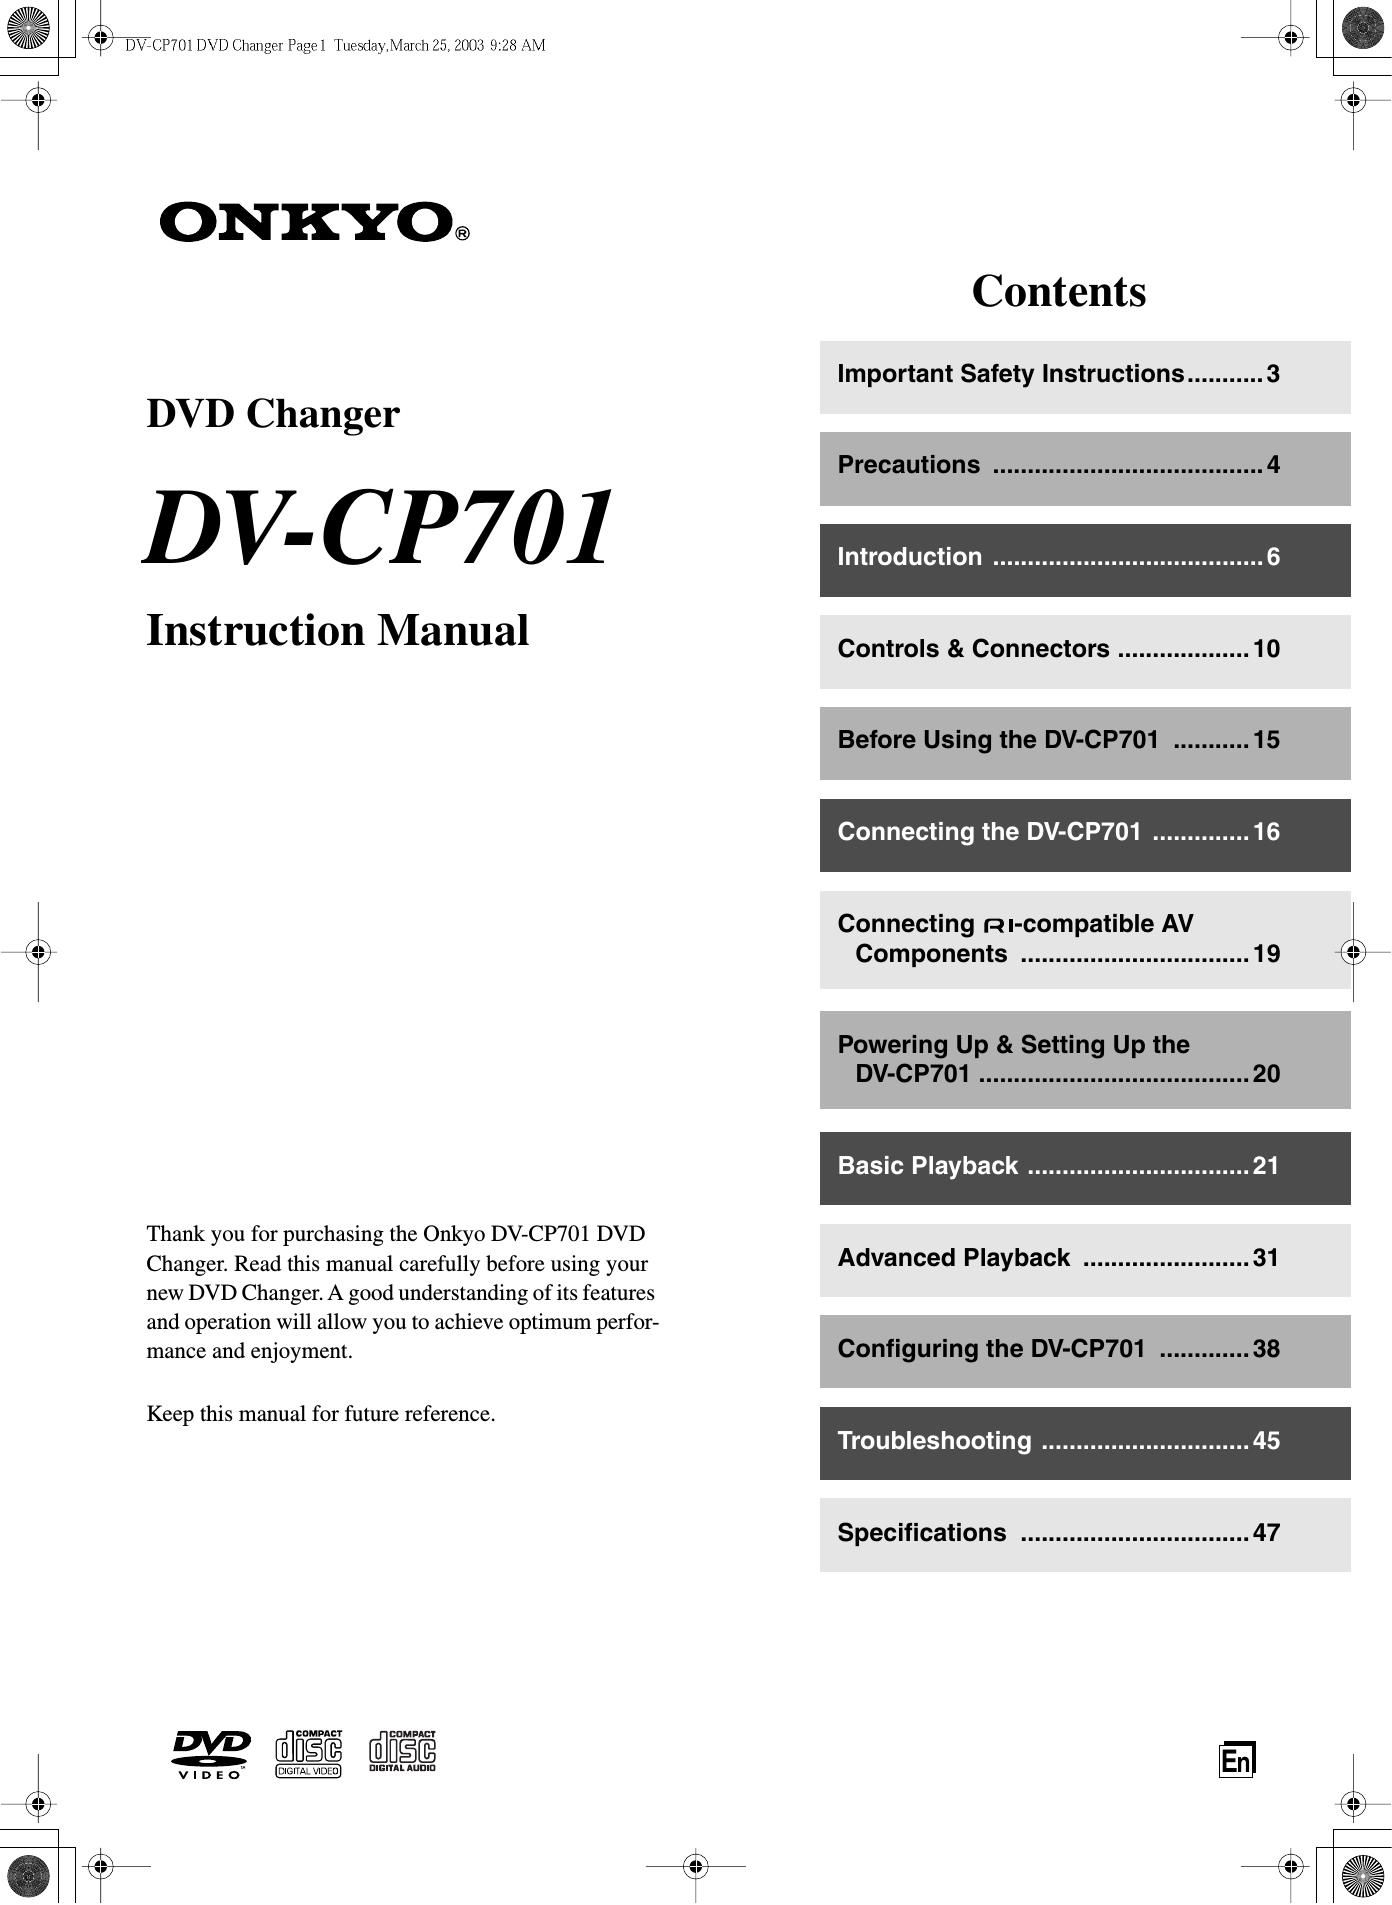 Onkyo DVCP 701 Owners Manual